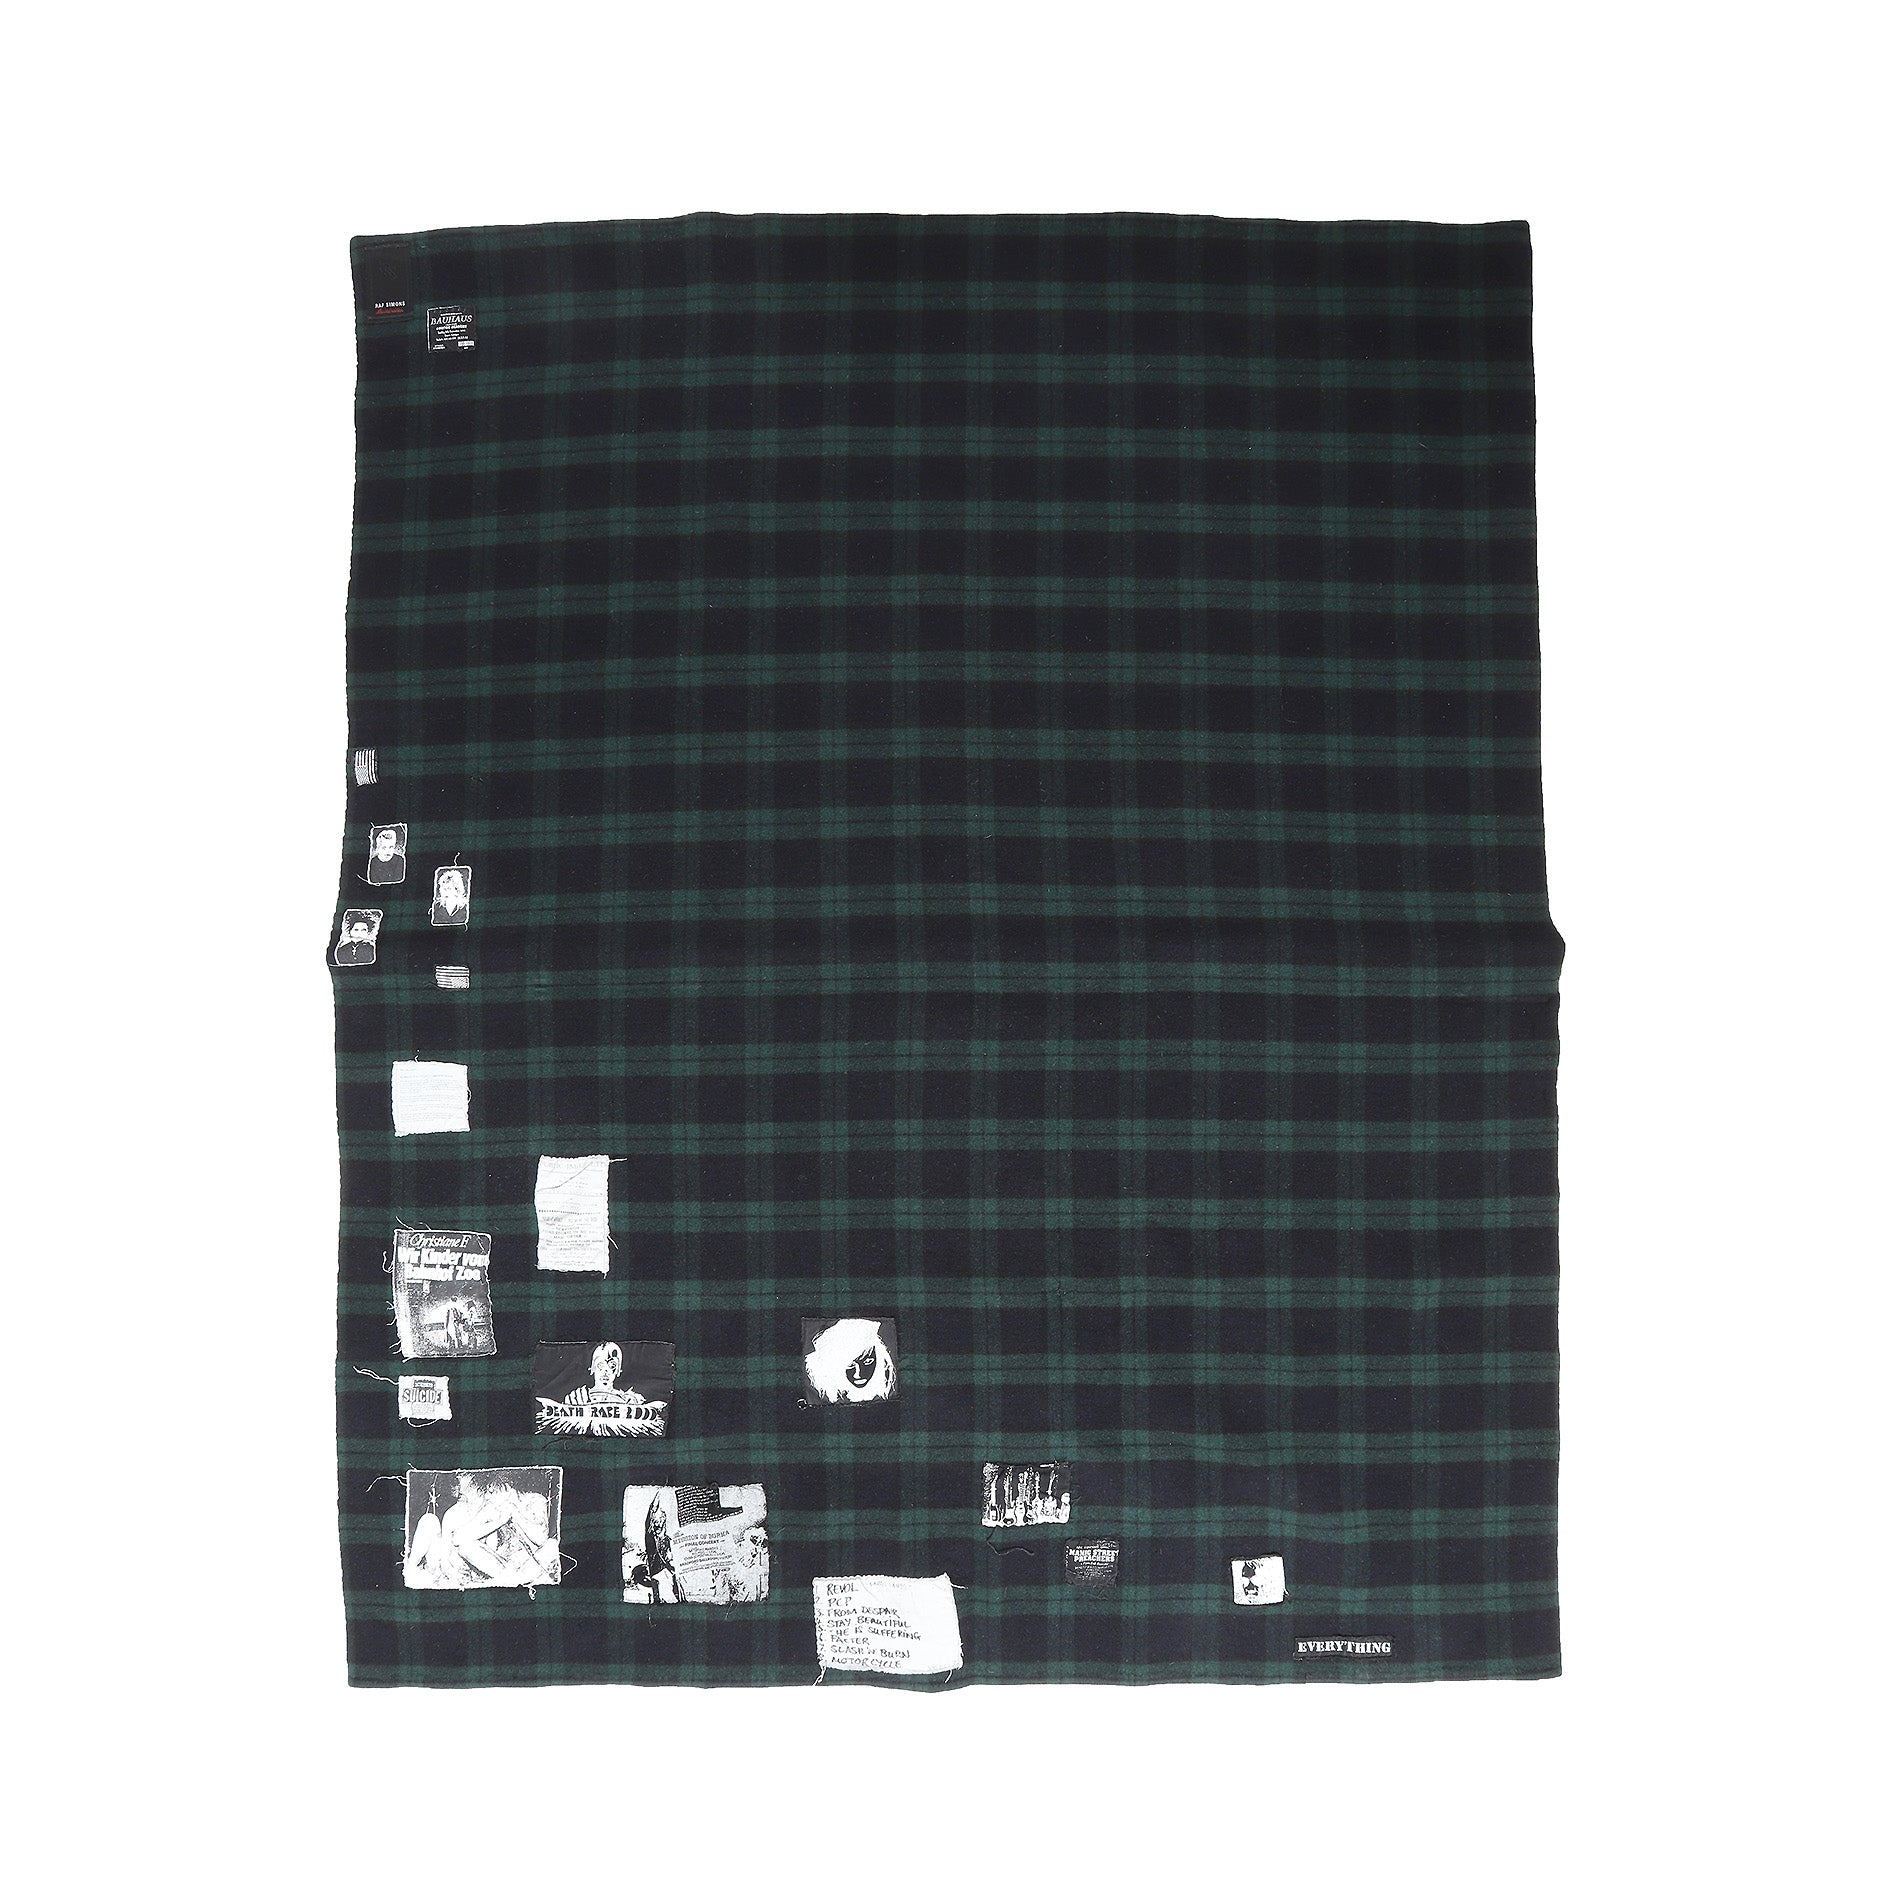 Raf Simons 2005 Limited Re-Edition Riot,Riot,Riot Patched Plaid Blanket